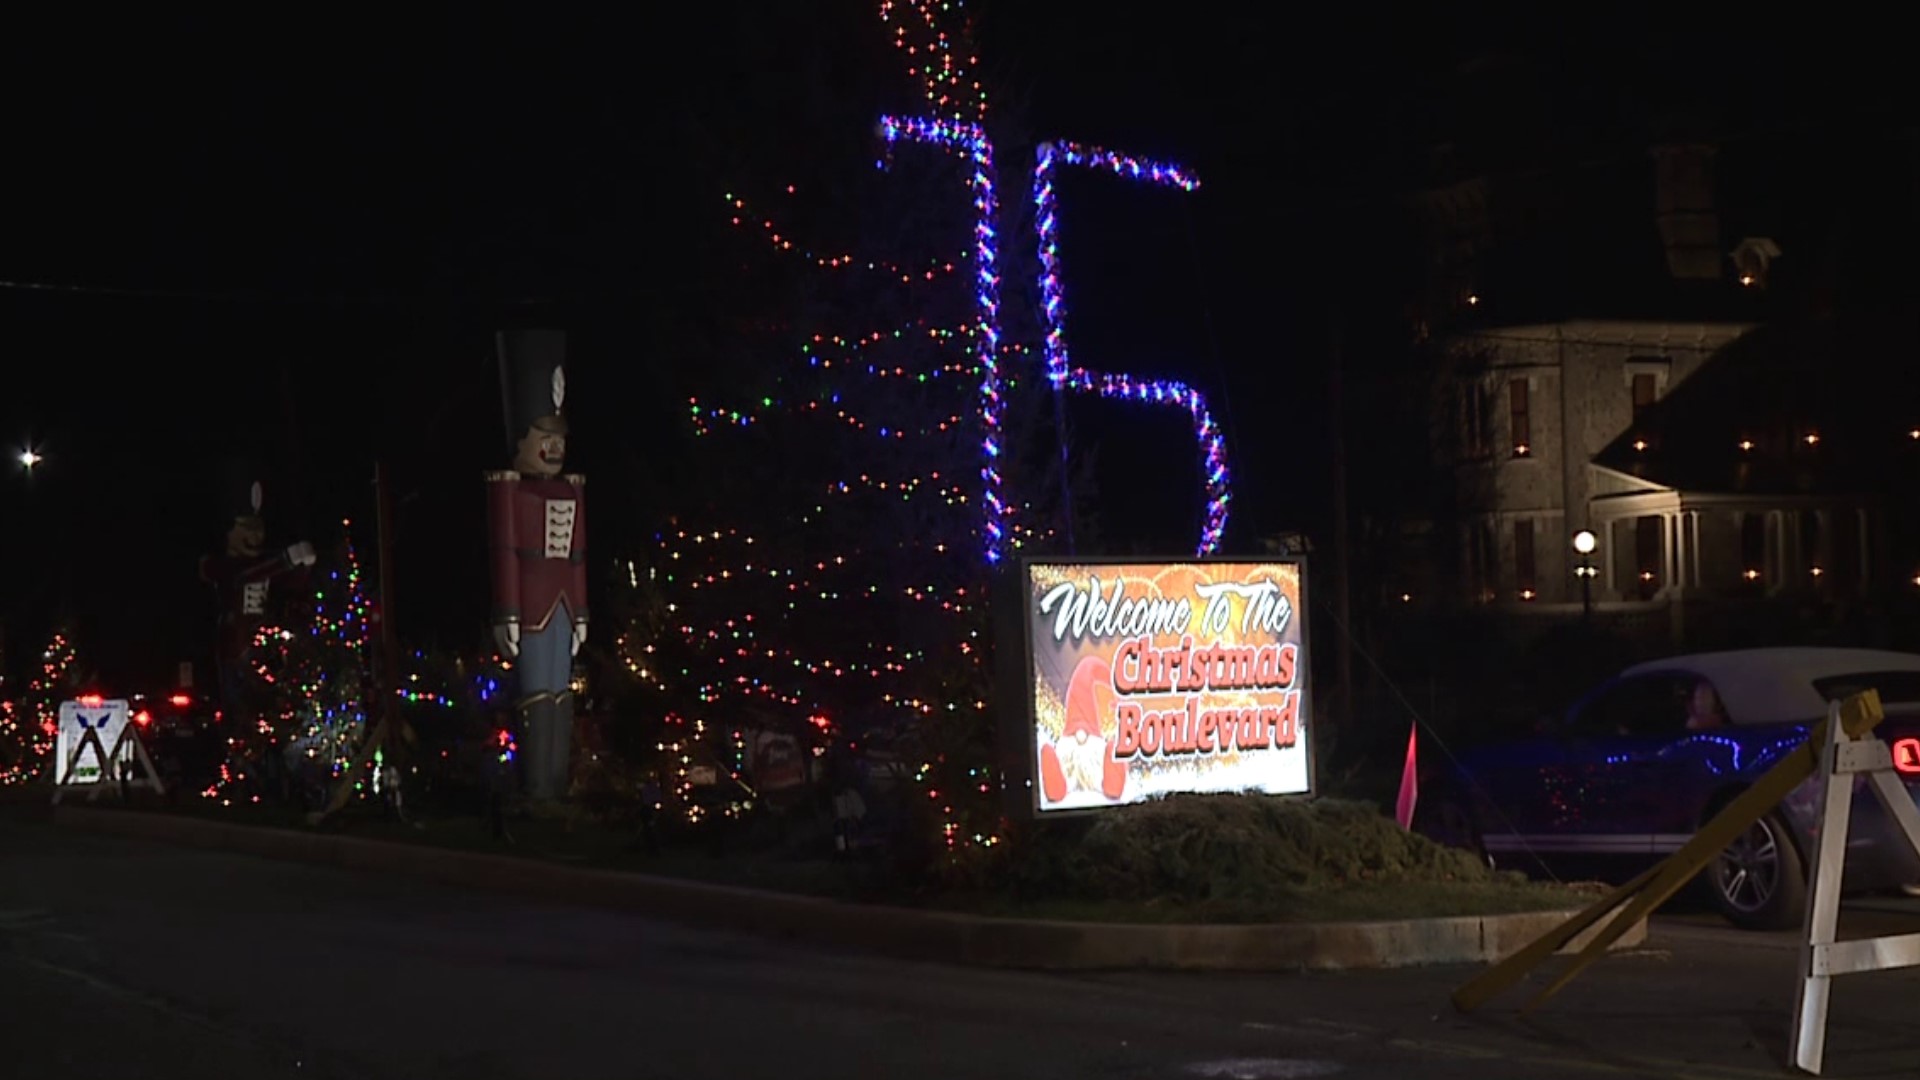 The mile-long stretch of holiday cheer is open until New Year's Eve in Columbia County.